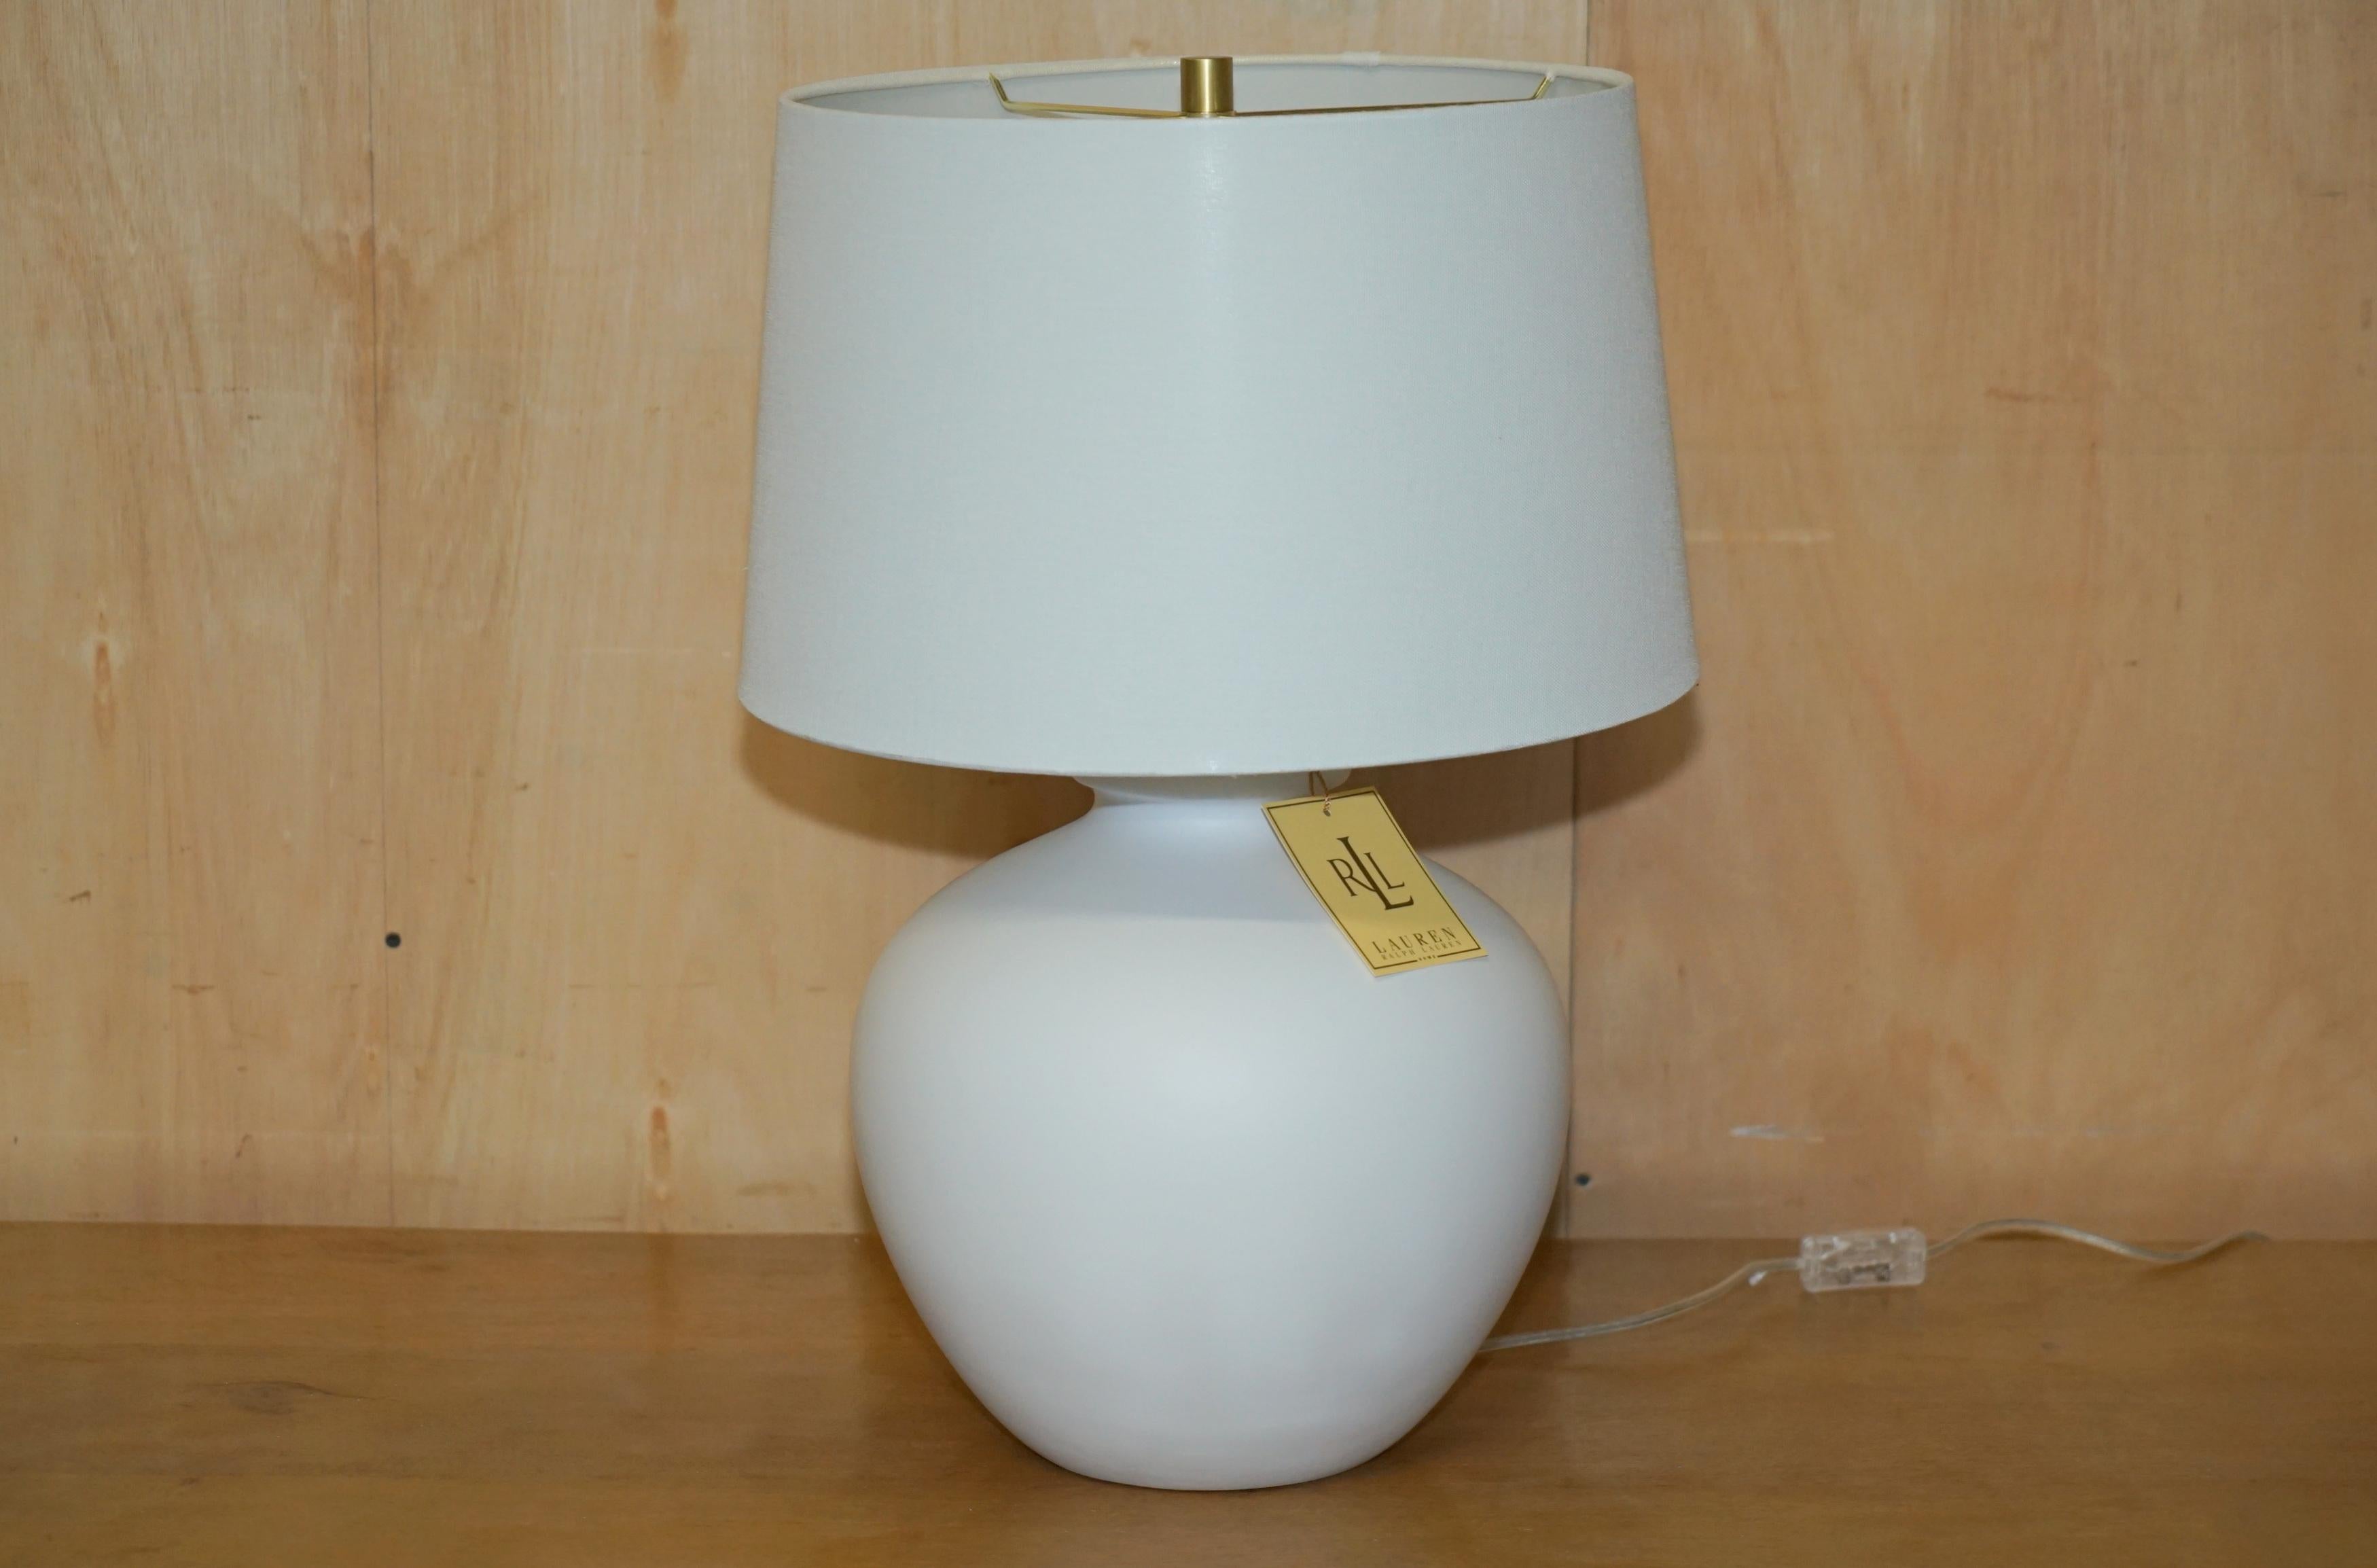 Royal House Antiques

Royal House Antiques is delighted to offer for sale 1 of 2 brand new in the original box Ralph Lauren ceramic white vase shaped table lamps

This lamp is part of a massive suite of Ralph Lauren lamps we bought for a show home